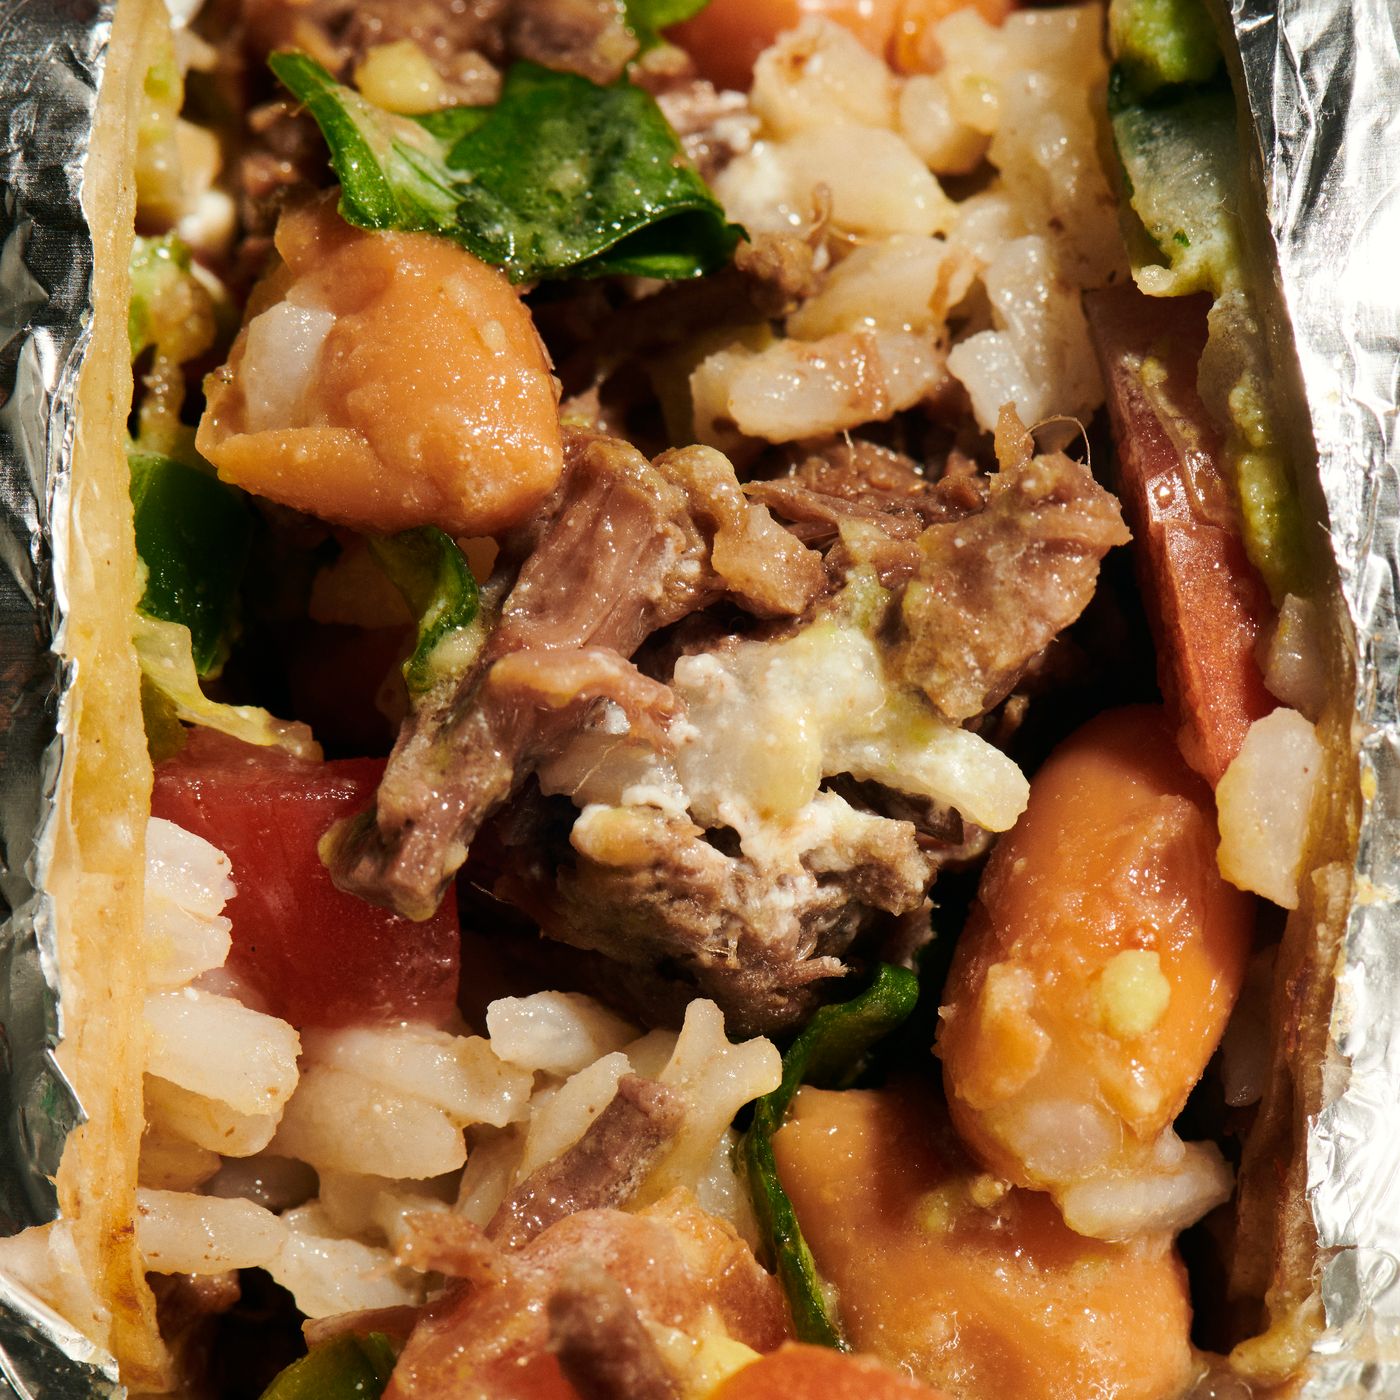 Tacoomar Makes the New Best NYC Burritos in